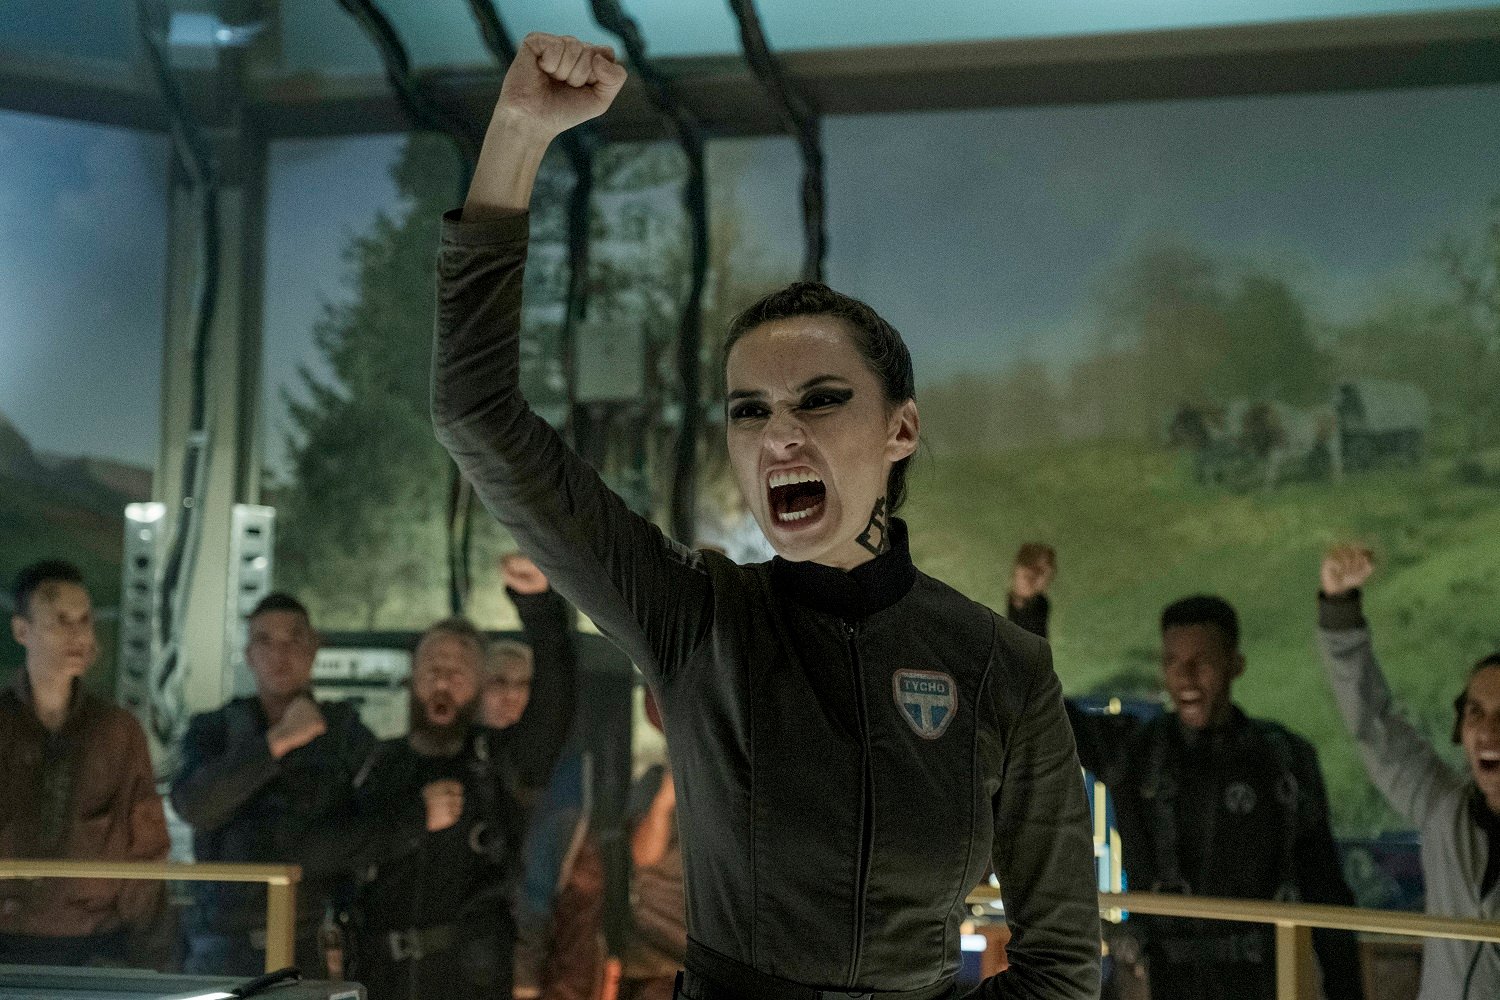 Cara Gee as Camina Drummer of The Expanse, Season 5 of which just ended